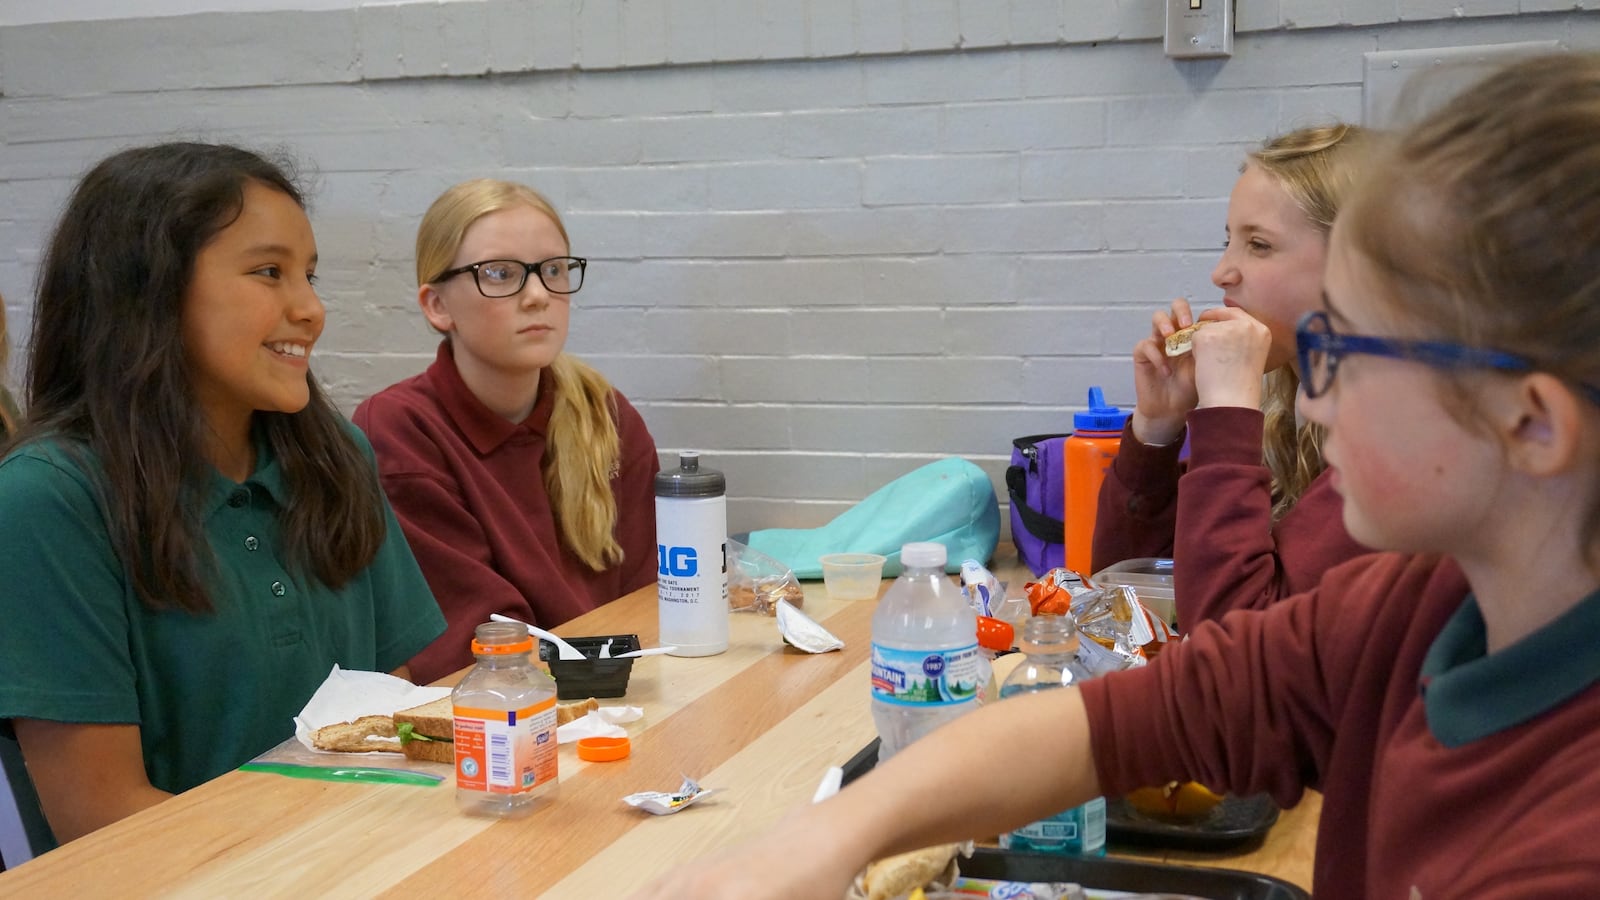 Students eat lunch at the Oaks Academy Middle School, a private Christian school that is integrated by design.